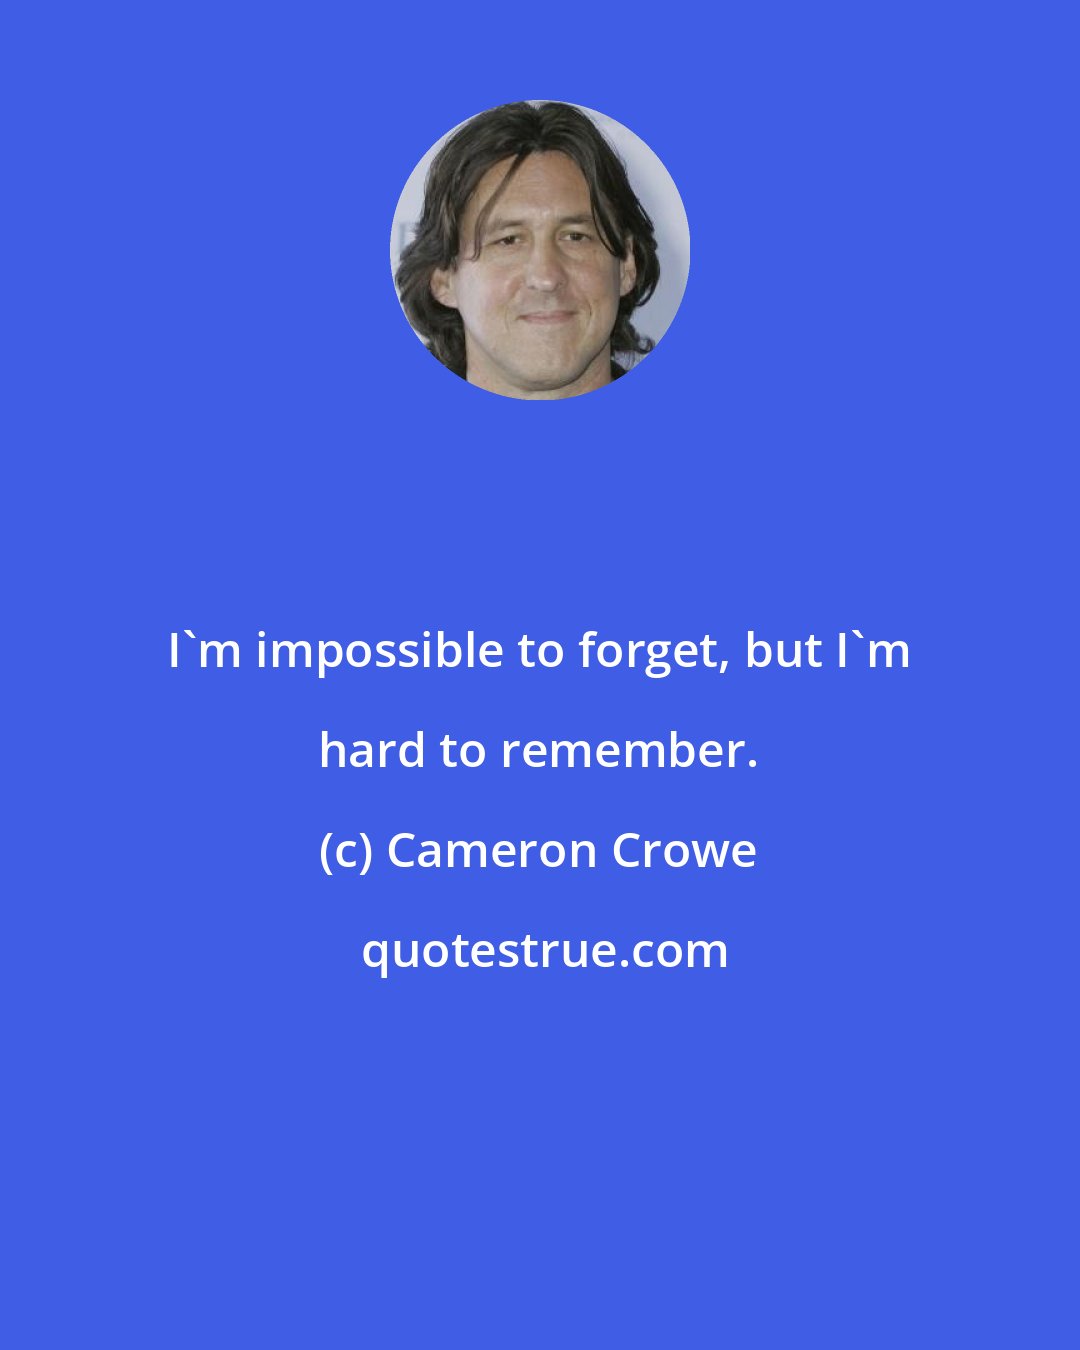 Cameron Crowe: I'm impossible to forget, but I'm hard to remember.